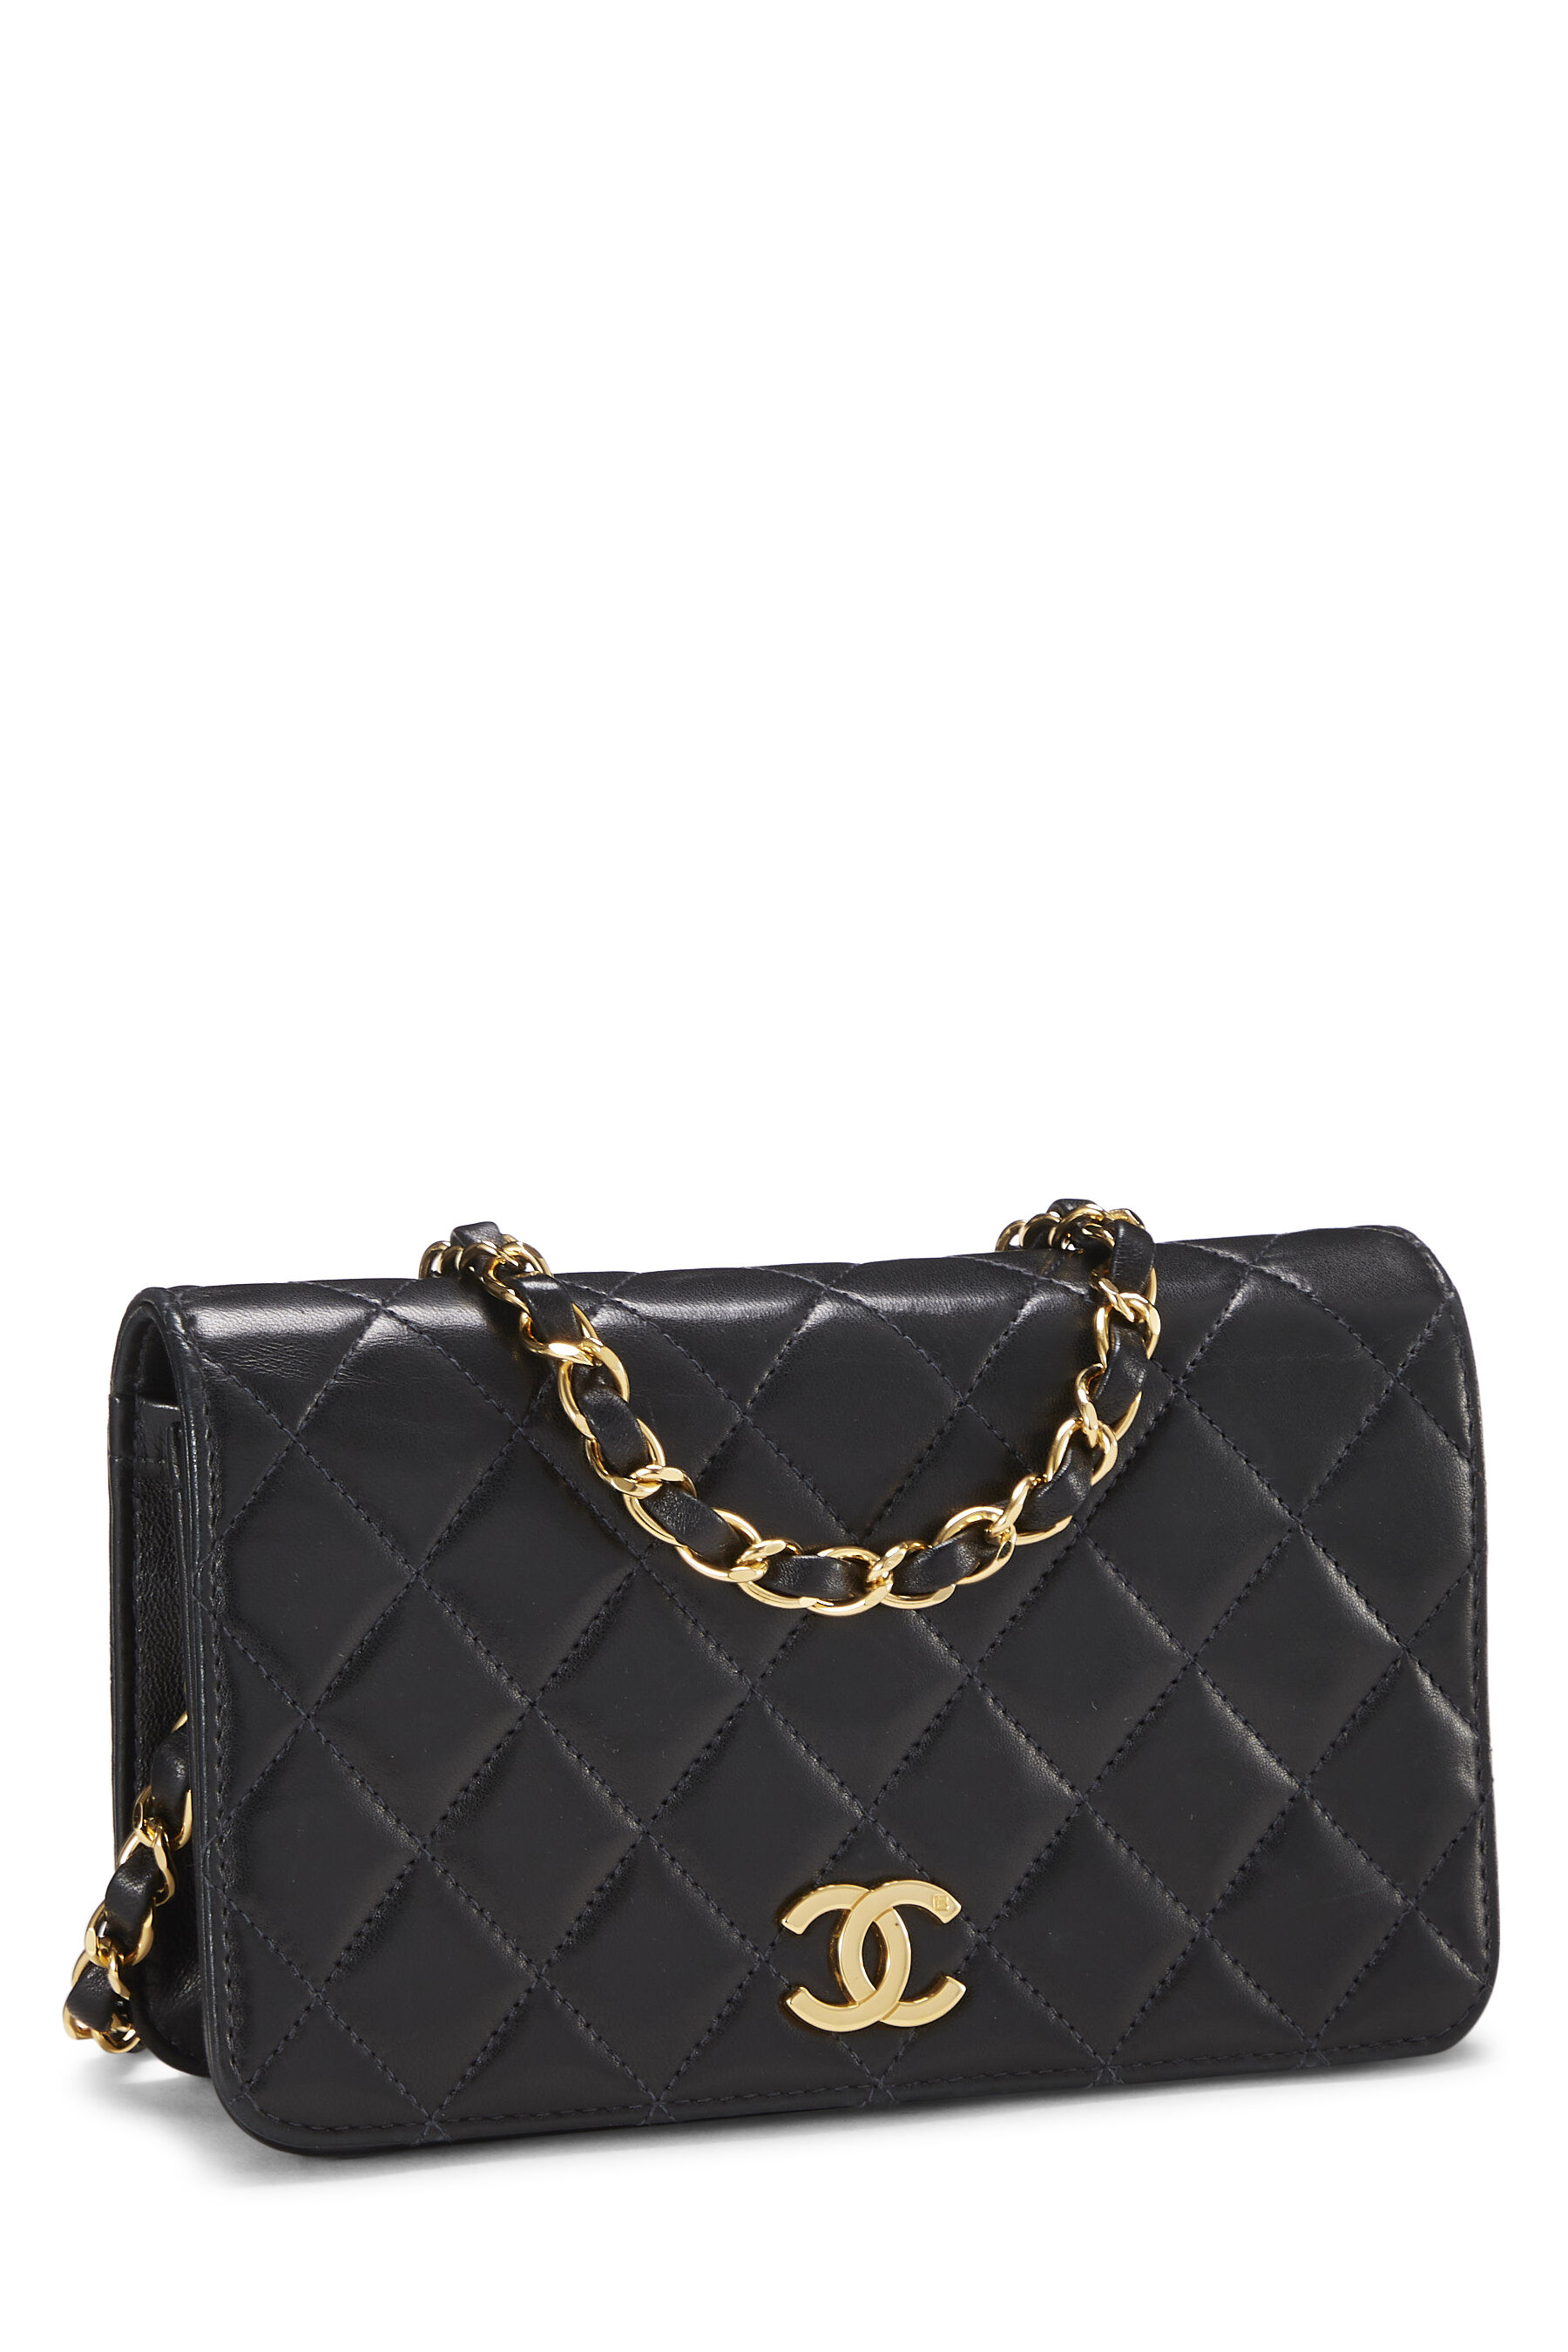 Chanel - Black Quilted Lambskin Snap Full Flap Mini